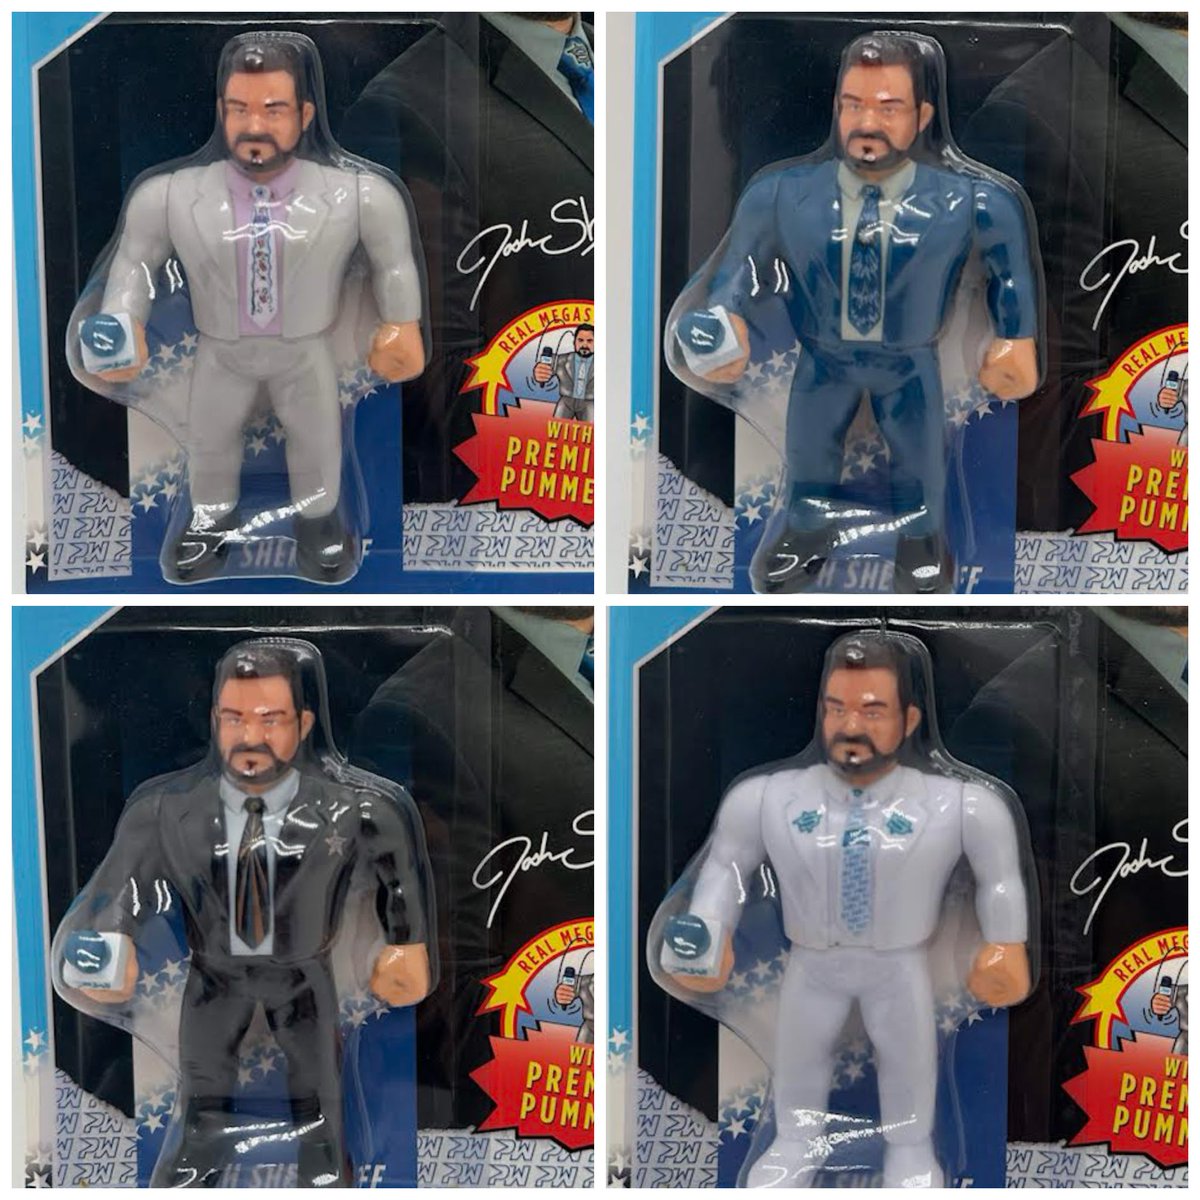 🚨AVAILABLE NOW🚨 Get your limited edition Josh Shernoff @WatchOnPremier action figures! Only 50 available of each on the US 🇺🇸! ⭐️Premier commentary ⭐️Ric Flair’s Last Match ⭐️Blue (Chase) (40 made) ⭐️@WrestShowcase ‘22 ⭐️@WrestShowcase ‘23 Order now! sosaysshernoff.bigcartel.com/product/premie…